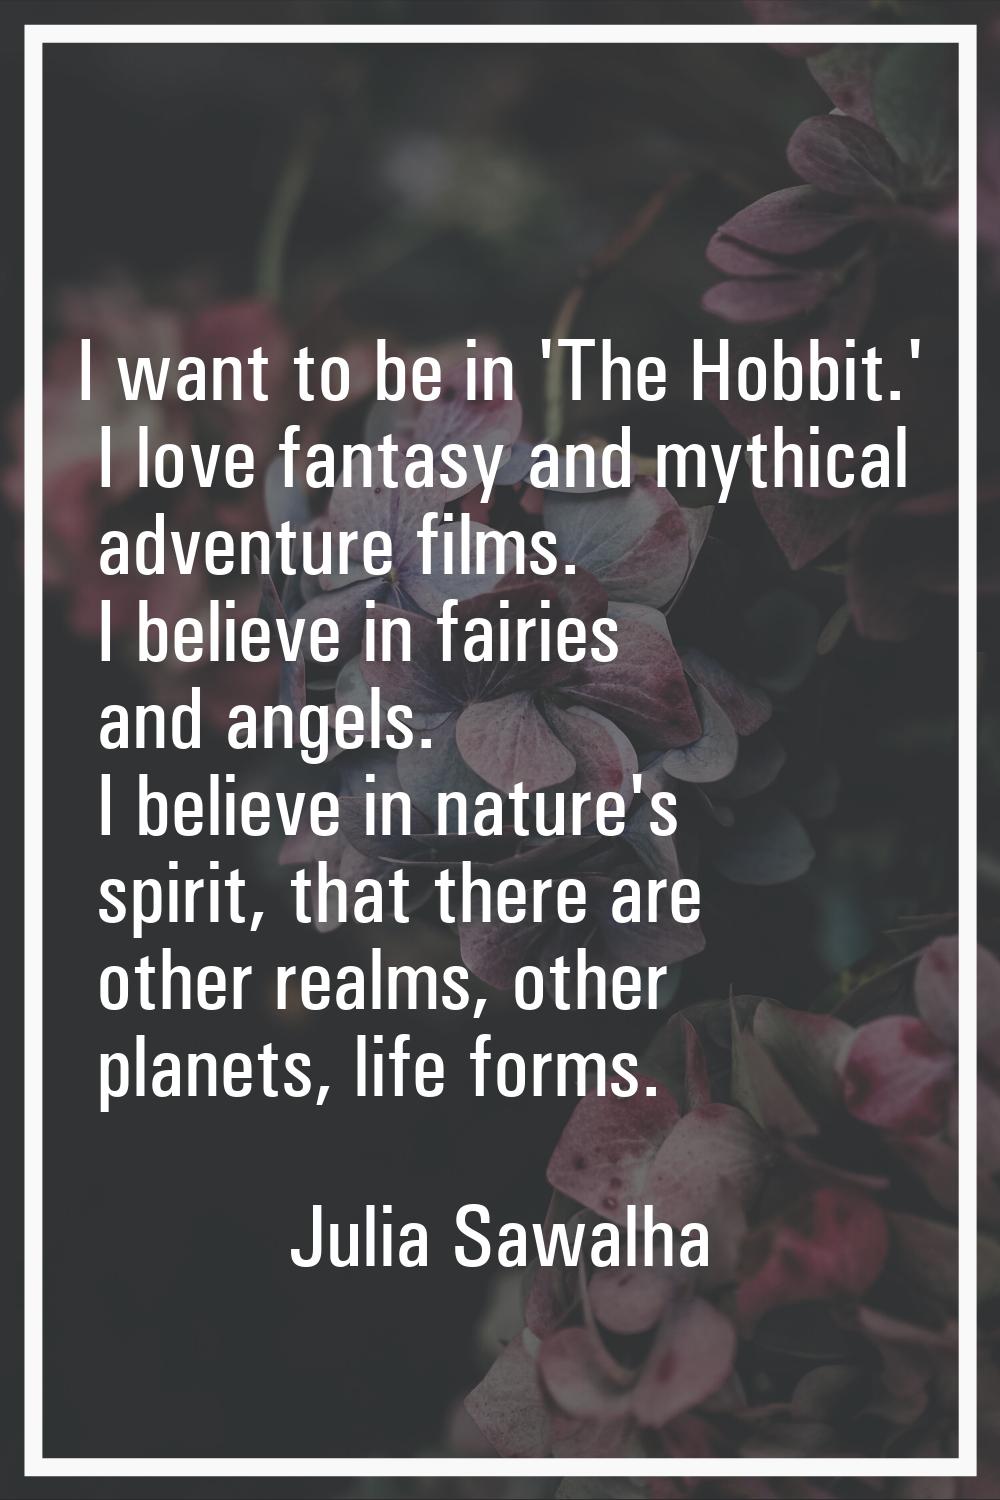 I want to be in 'The Hobbit.' I love fantasy and mythical adventure films. I believe in fairies and